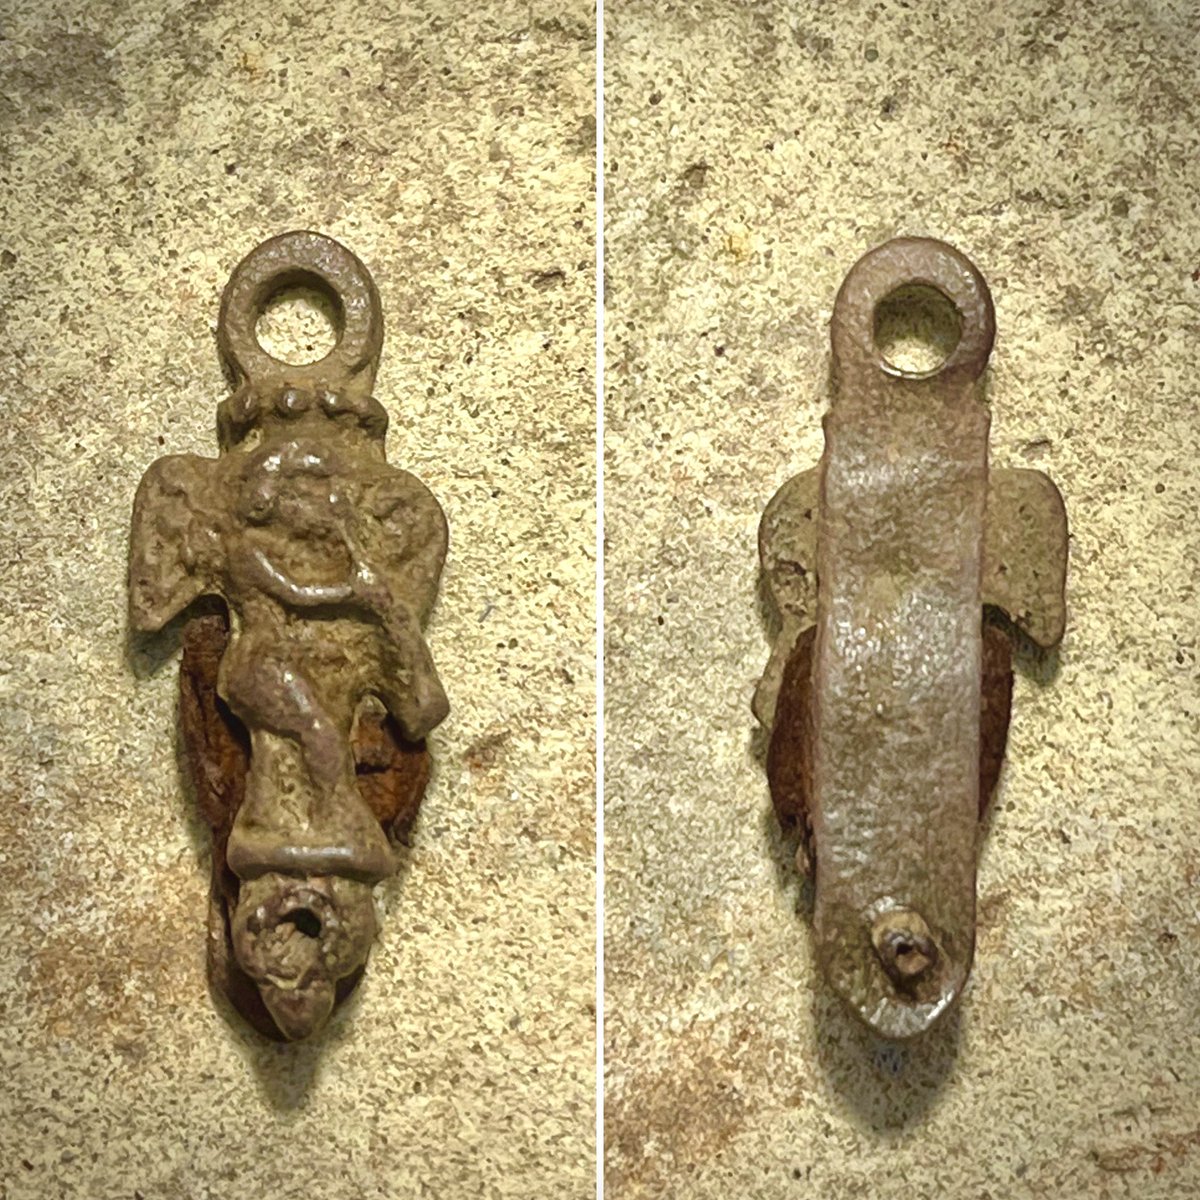 👼 I found this exquisite little object on the Thames foreshore during fieldwork. I think it’s a medieval or early post-medieval strap-end, decorated with a winged angel blowing a trumpet. If my dating is correct, it’s one of my best finds and will be reported to @MuseumofLondon